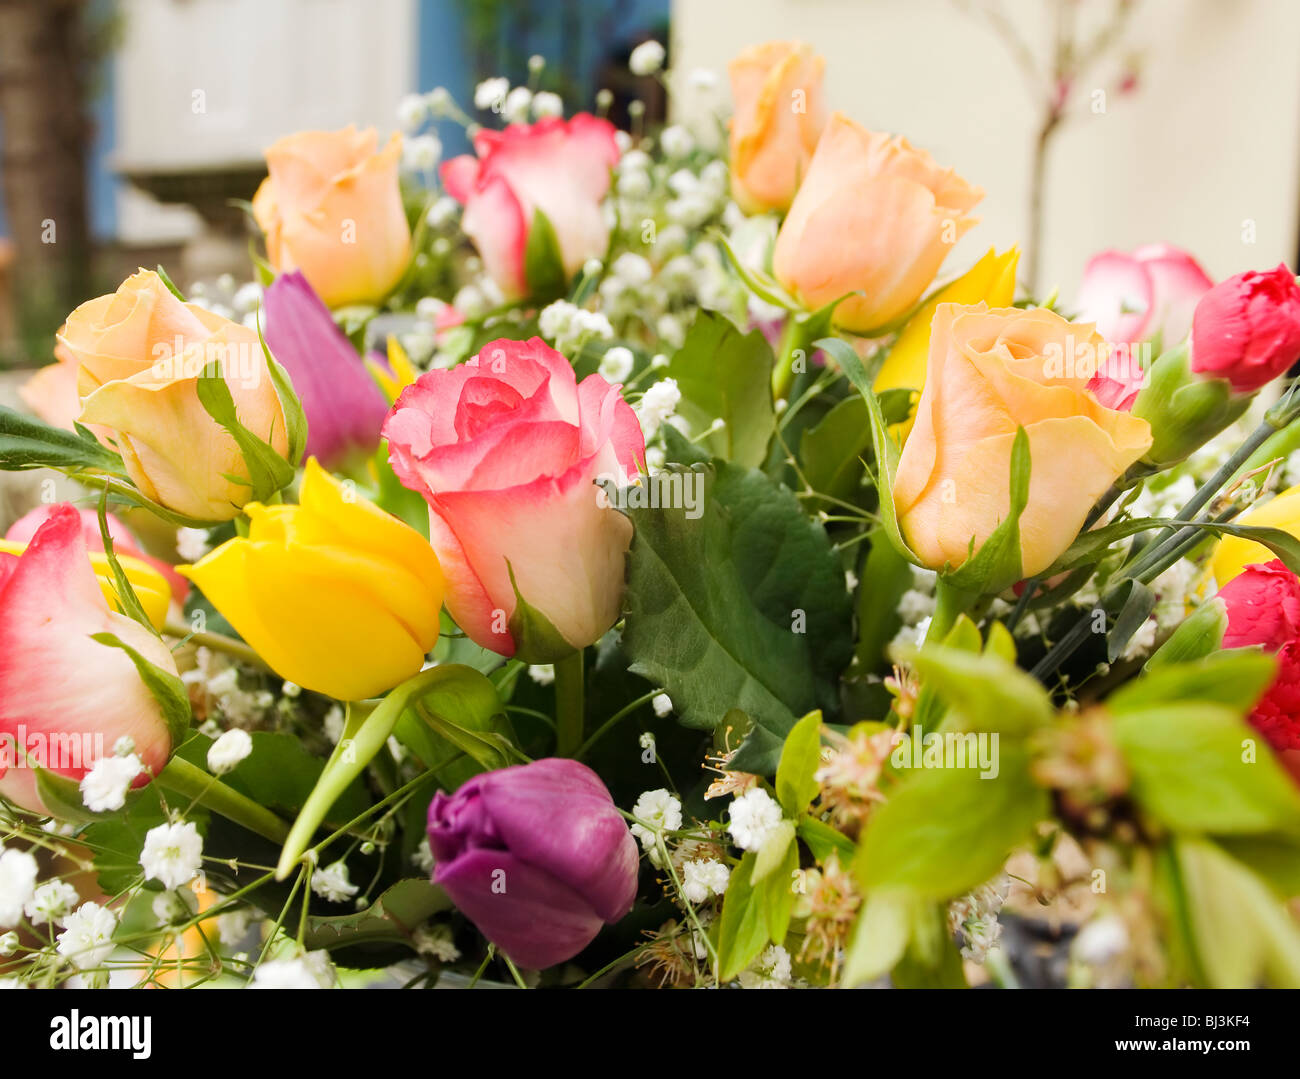 Spring flower arrangement in vase with roses, tulips  green leaves Stock Photo